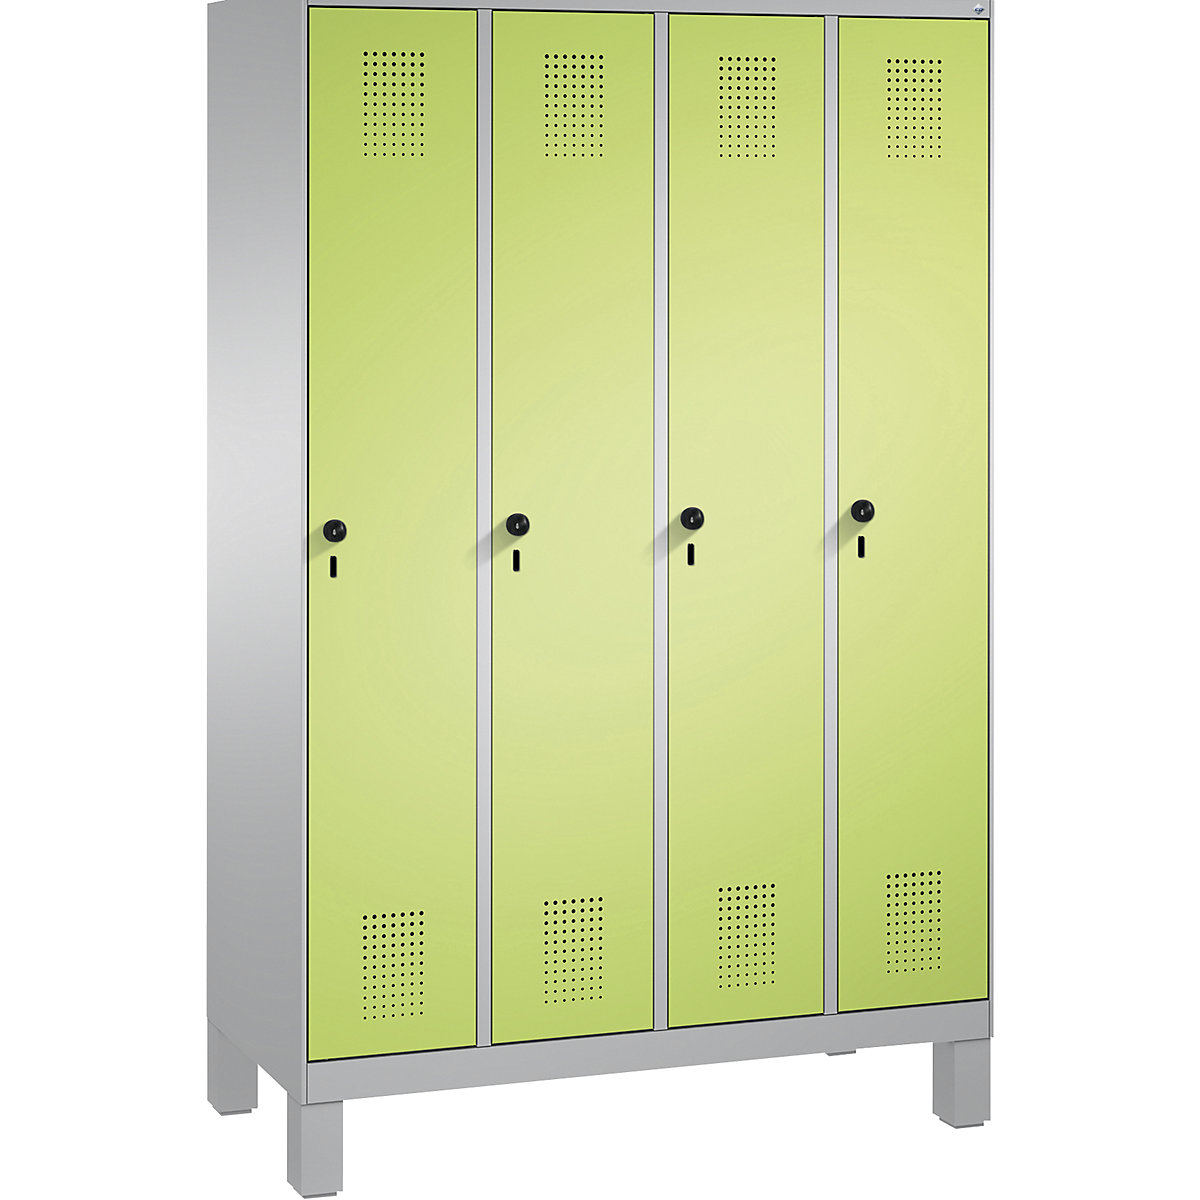 EVOLO cloakroom locker, with feet – C+P, 4 compartments, compartment width 300 mm, white aluminium / viridian green-16